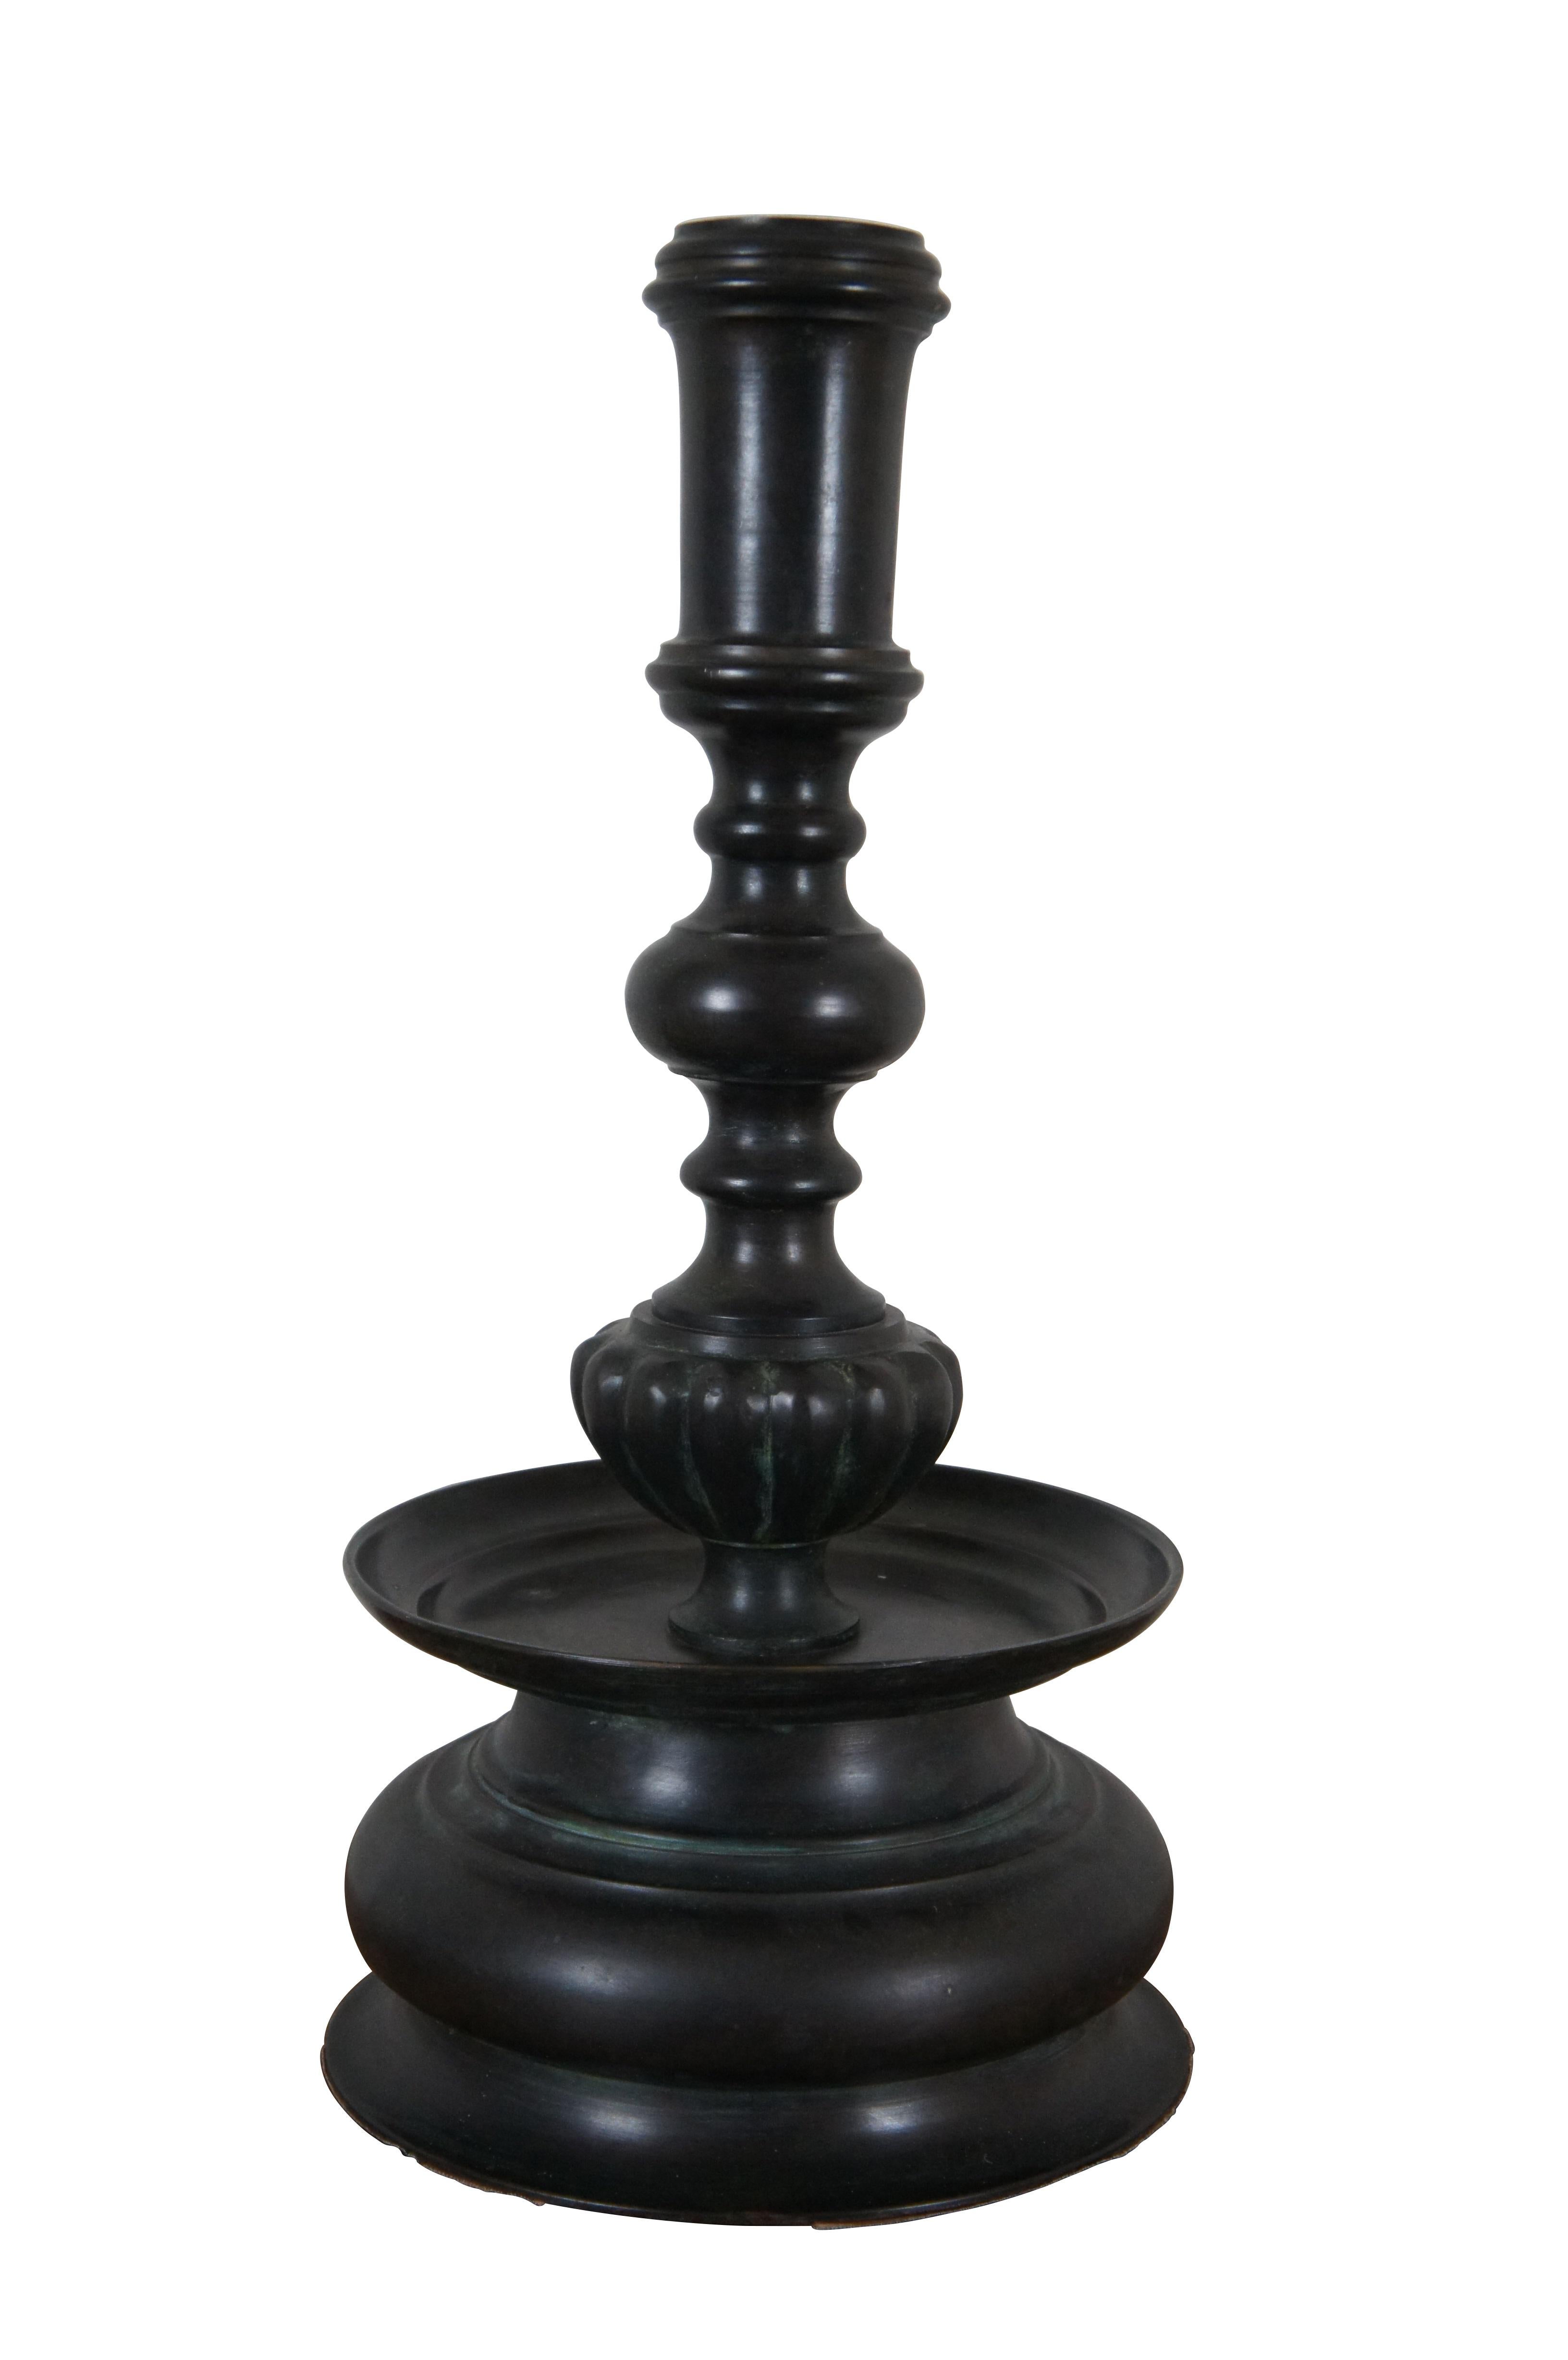 Monumental vintage heavy bronze altar / colonial style candle holder / candlestick, produced by Maitland Smith. Holds a 3” pillar candle (one included). Designed and Handmade in Thailand.

Dimensions:
10.5